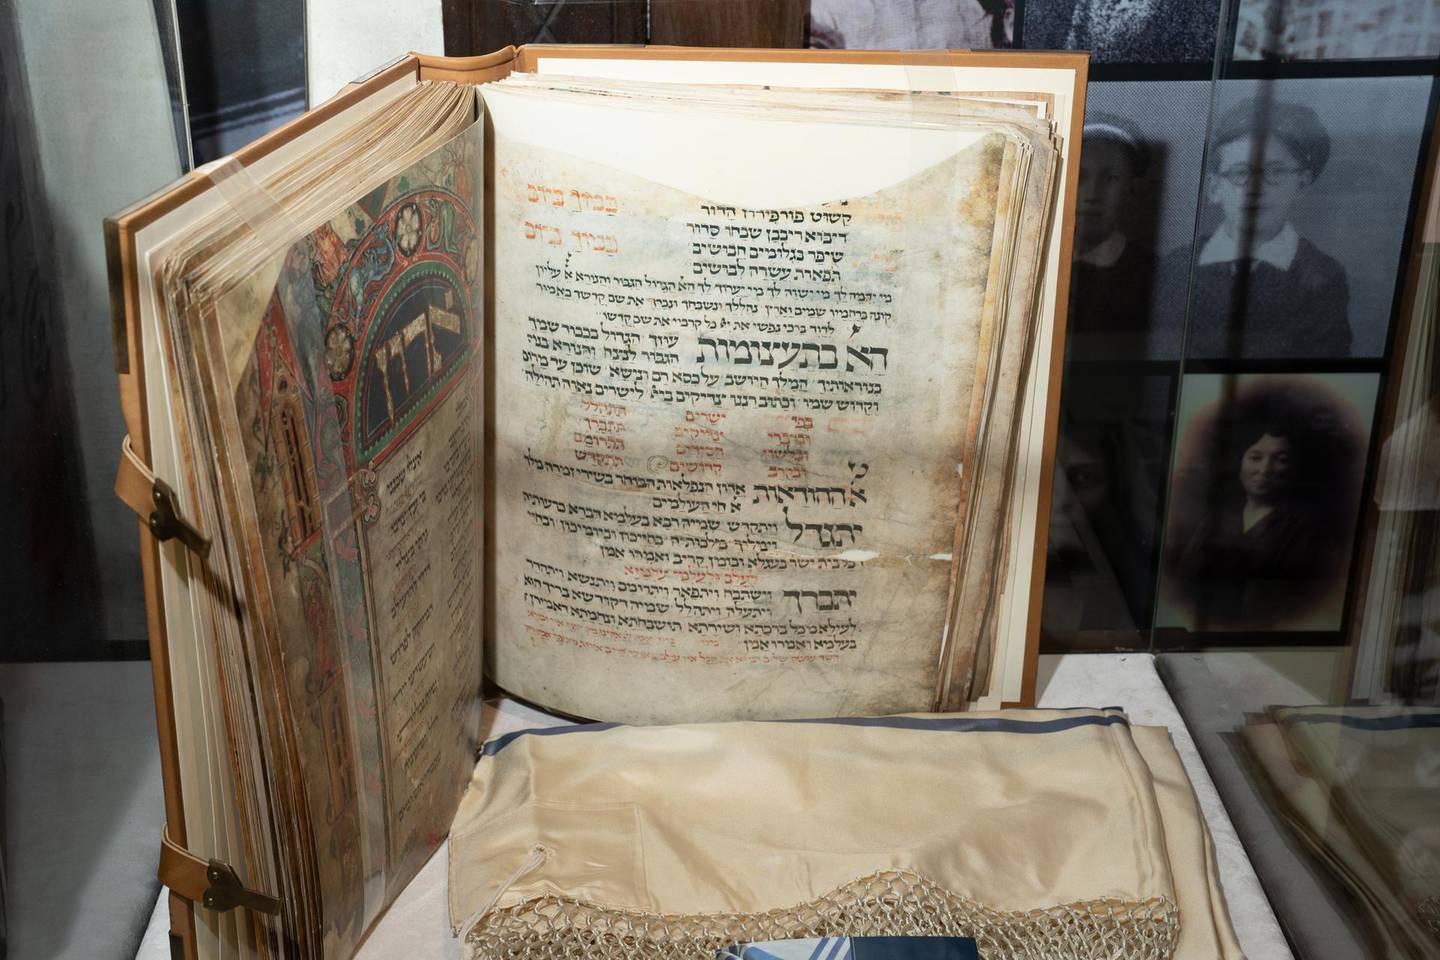 The exhibition includes historical sections that showcase rare items such as the facsimile of a Mahzor, a Jewish prayer book, from the city of Worms, Germany. Courtesy Olga Fried